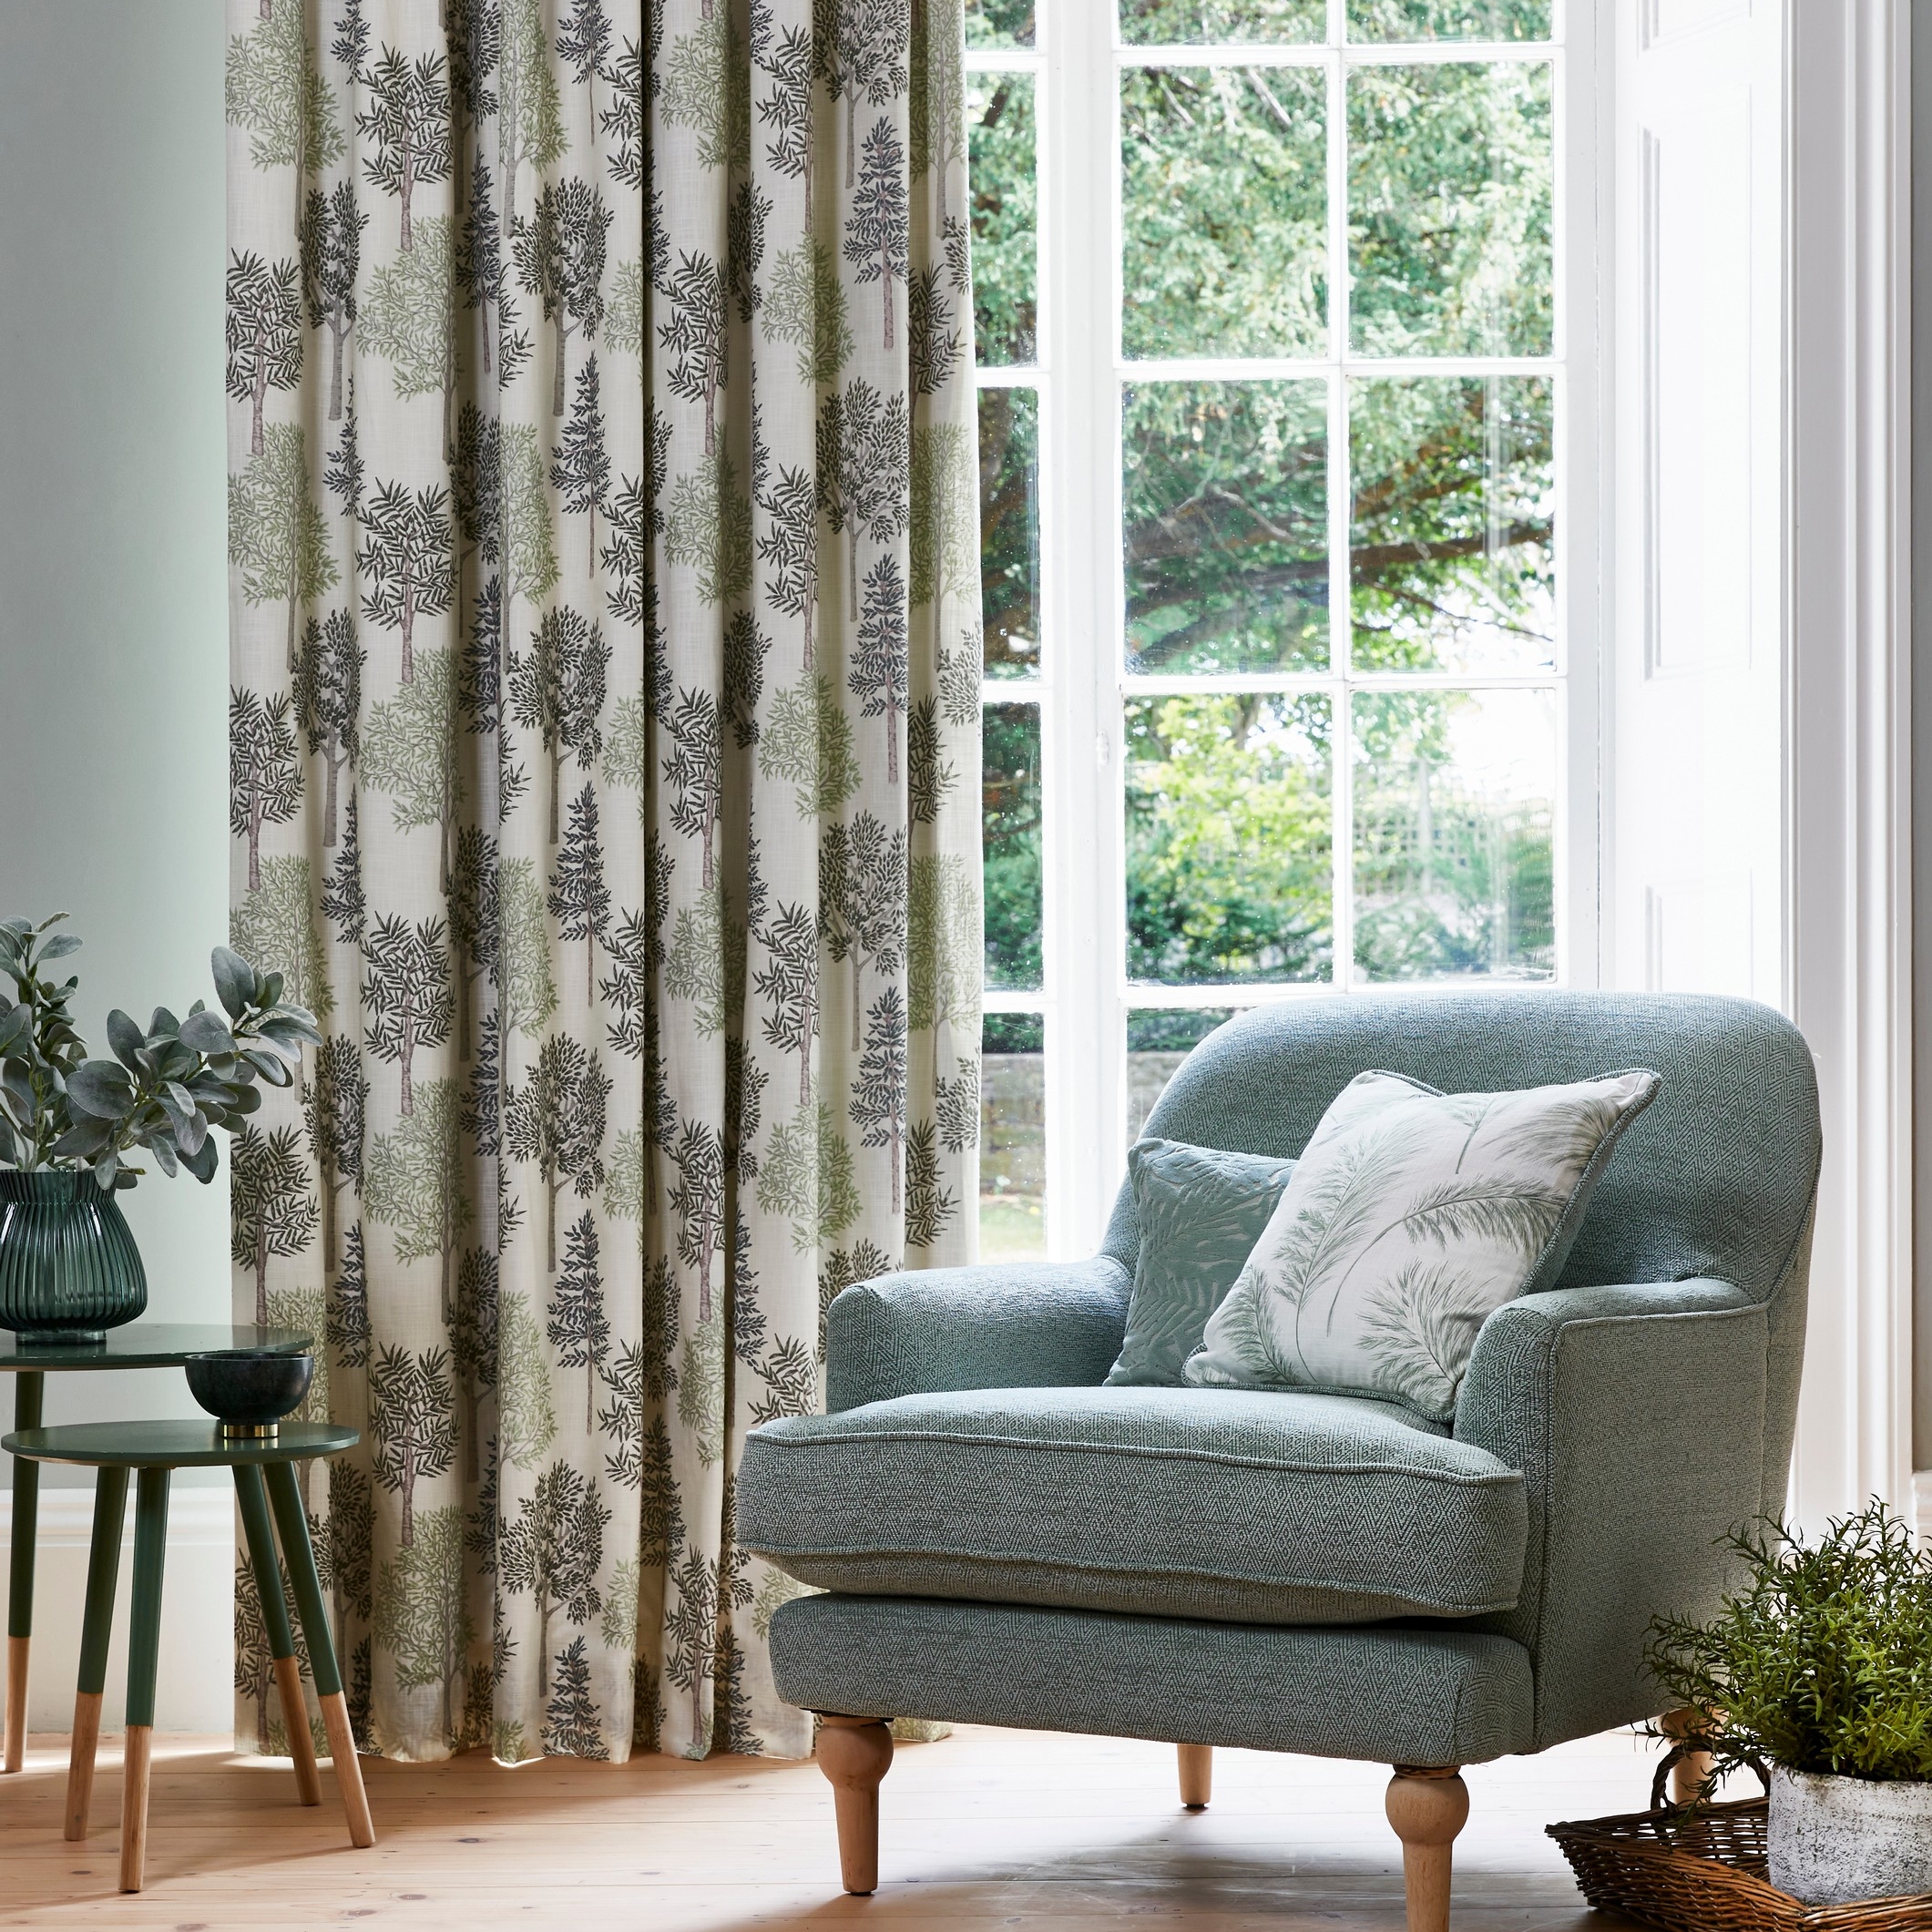 4. Library Custom Made Curtains - Coppice Apple